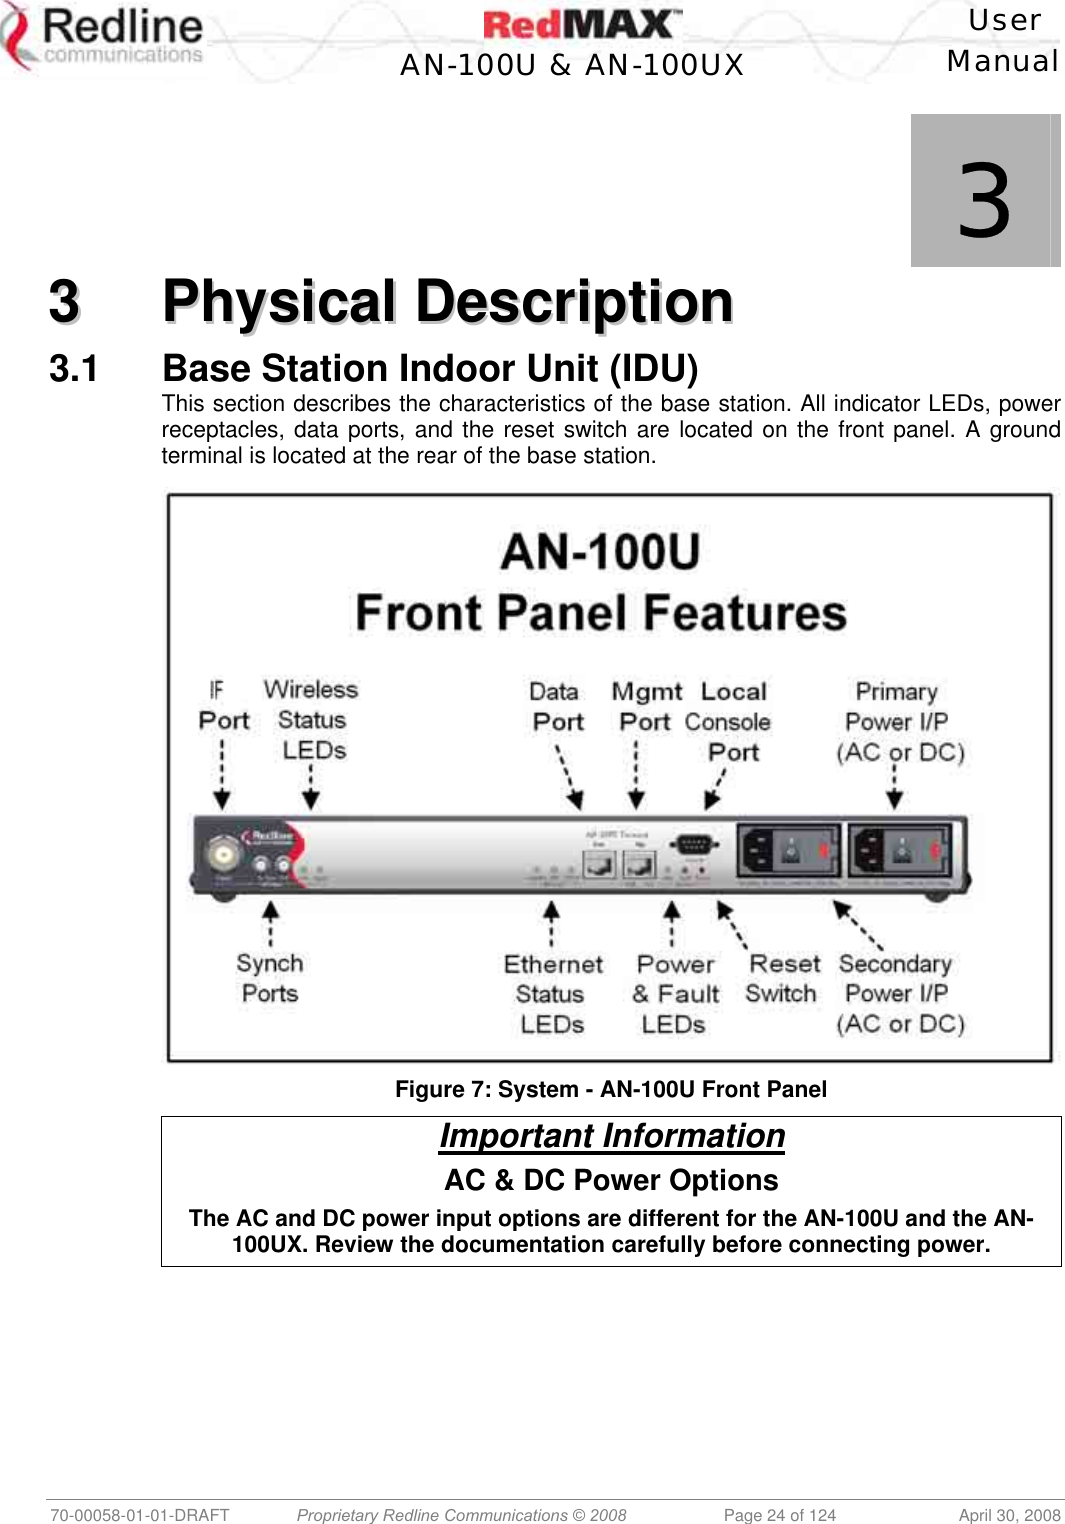    User  AN-100U &amp; AN-100UX Manual   70-00058-01-01-DRAFT  Proprietary Redline Communications © 2008   Page 24 of 124  April 30, 2008             3 33  PPhhyyssiiccaall  DDeessccrriippttiioonn  3.1  Base Station Indoor Unit (IDU) This section describes the characteristics of the base station. All indicator LEDs, power receptacles, data ports, and the reset switch are located on the front panel. A ground terminal is located at the rear of the base station.   Figure 7: System - AN-100U Front Panel Important Information AC &amp; DC Power Options The AC and DC power input options are different for the AN-100U and the AN-100UX. Review the documentation carefully before connecting power.  